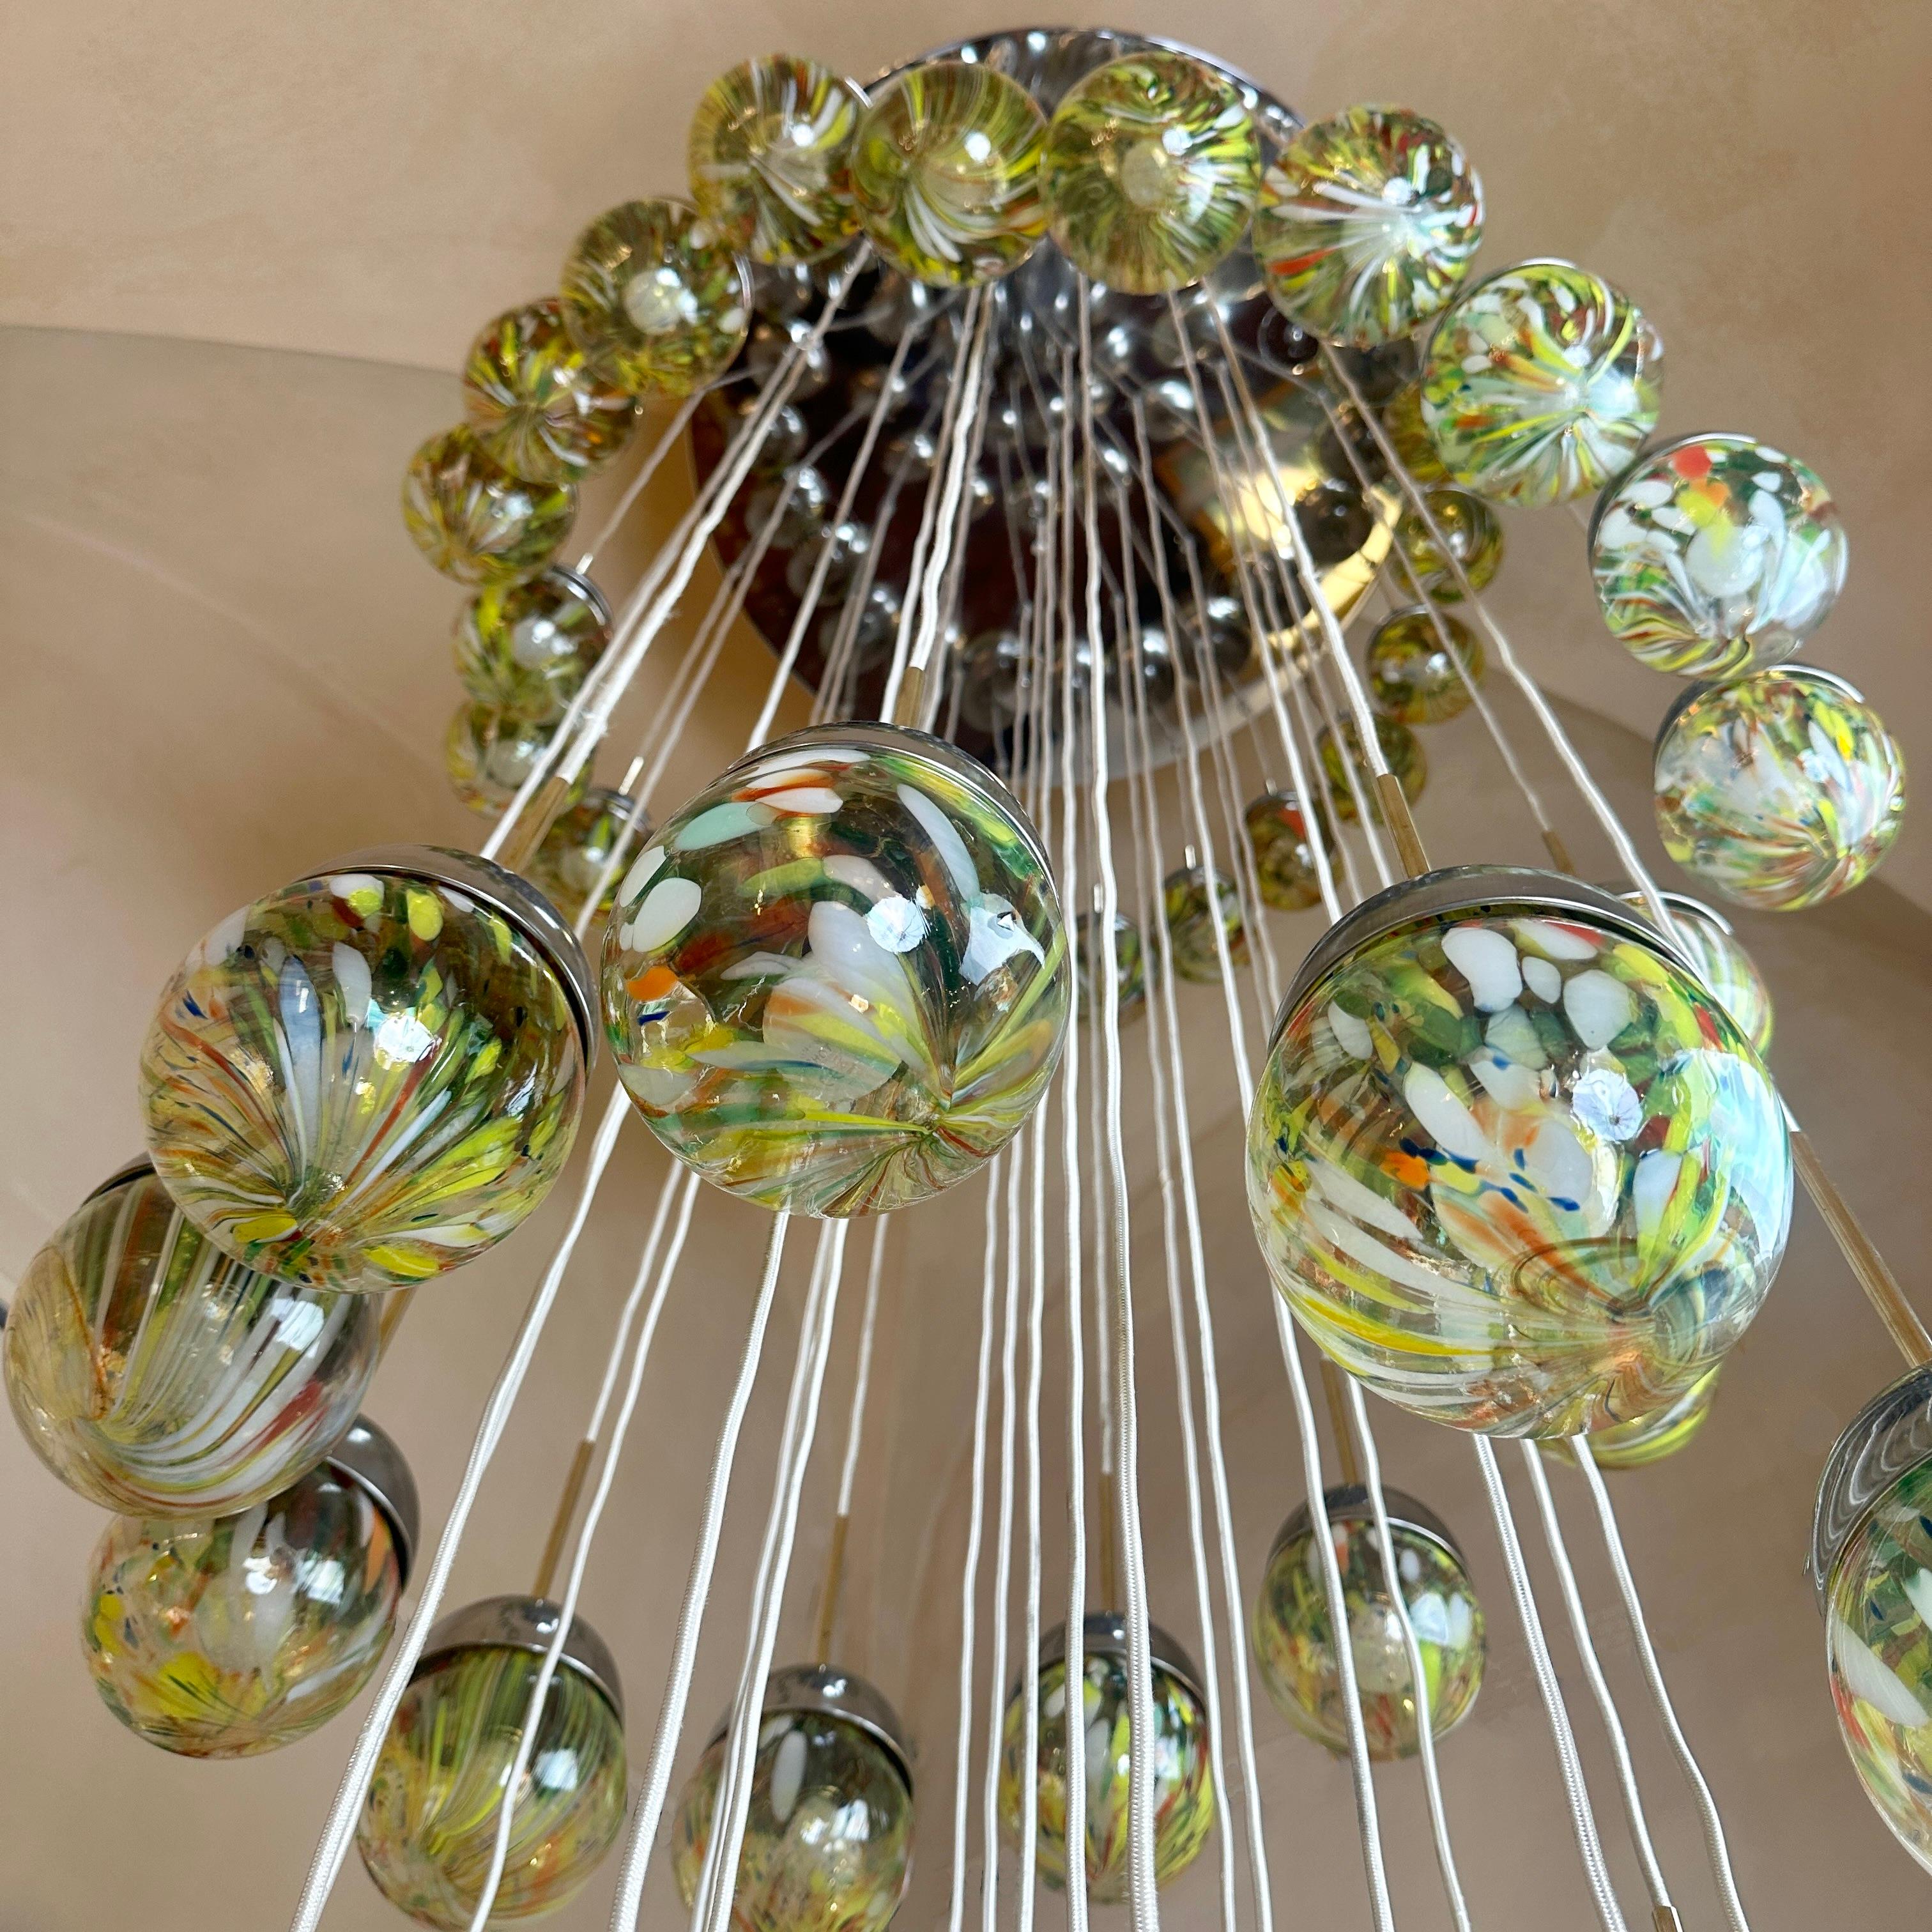 Impressive Murano Art Glass Cascade Chandelier with a true waterfall of light with 55 E14 LED Light Bulbs (warm light is recommended). 
The transparent Murano glass boules are all multicolored striated and stained making each piece different from